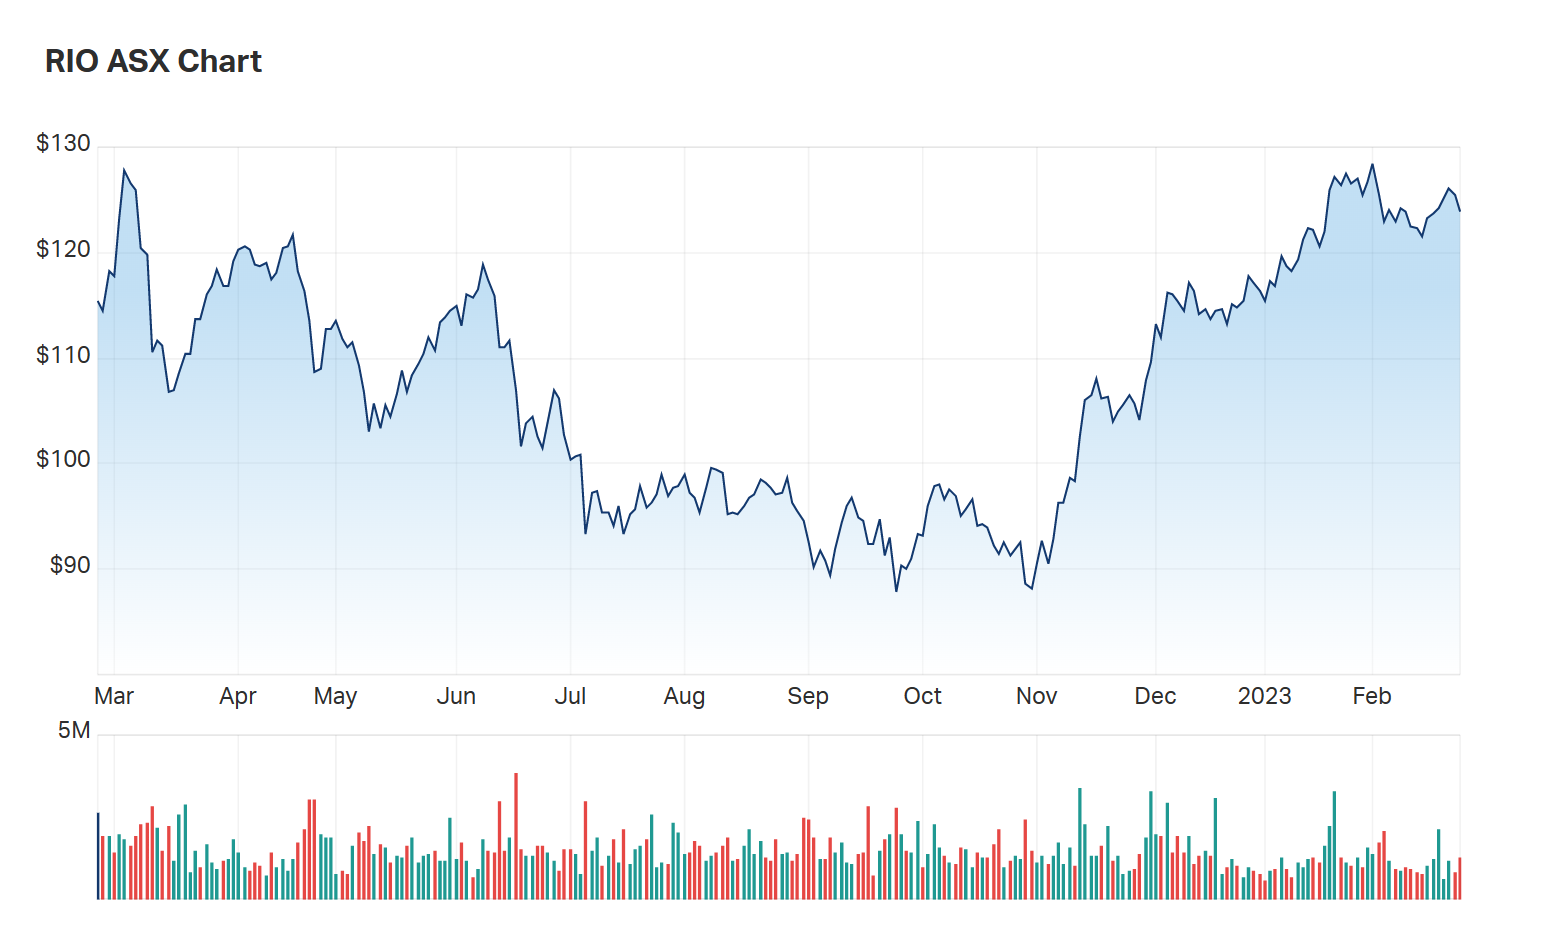 Rio Tinto's one year charts at close on Thursday